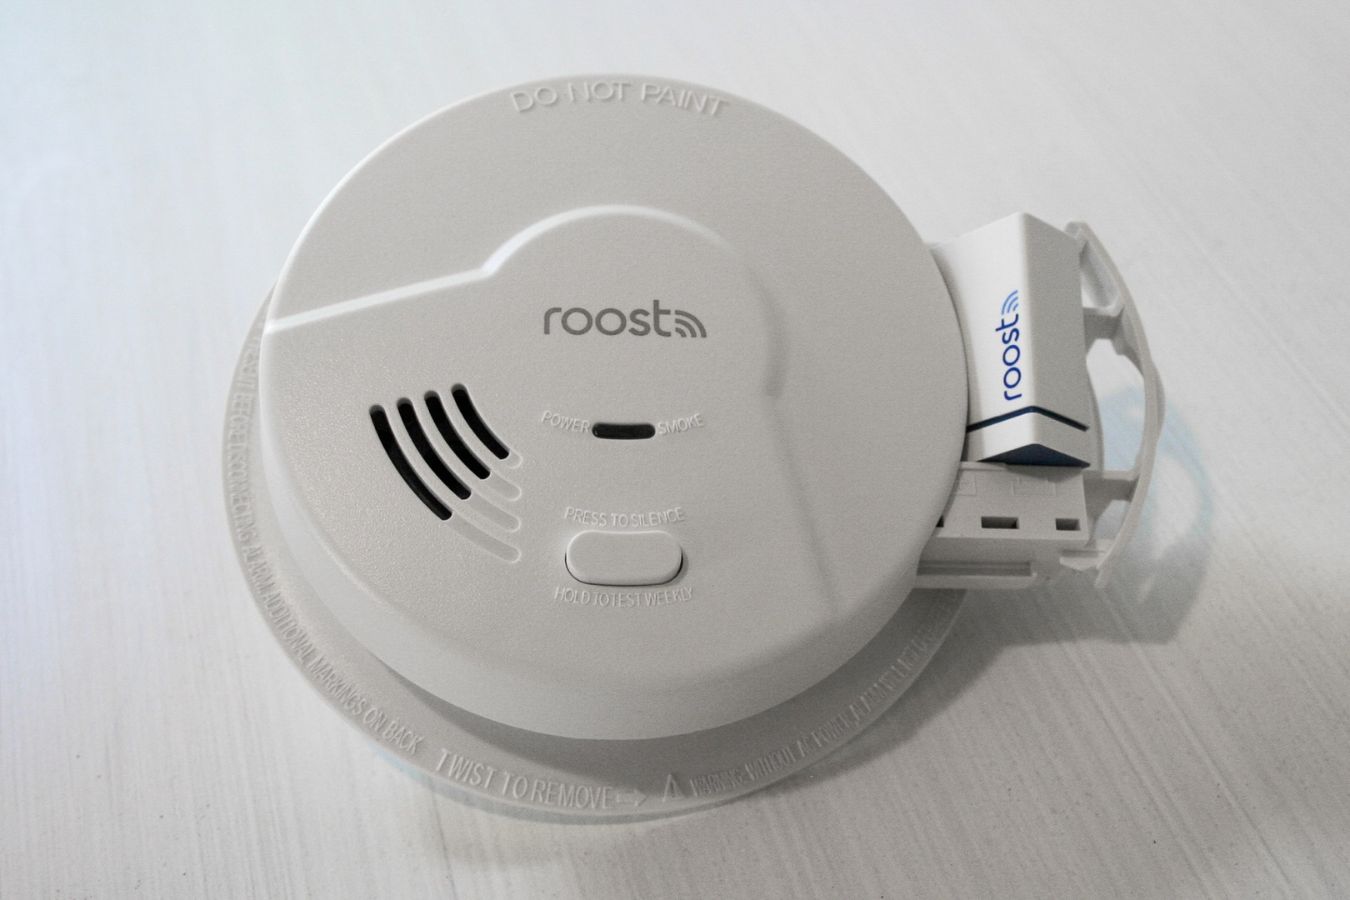 How Long Do Batteries Last In A Smoke Detector?